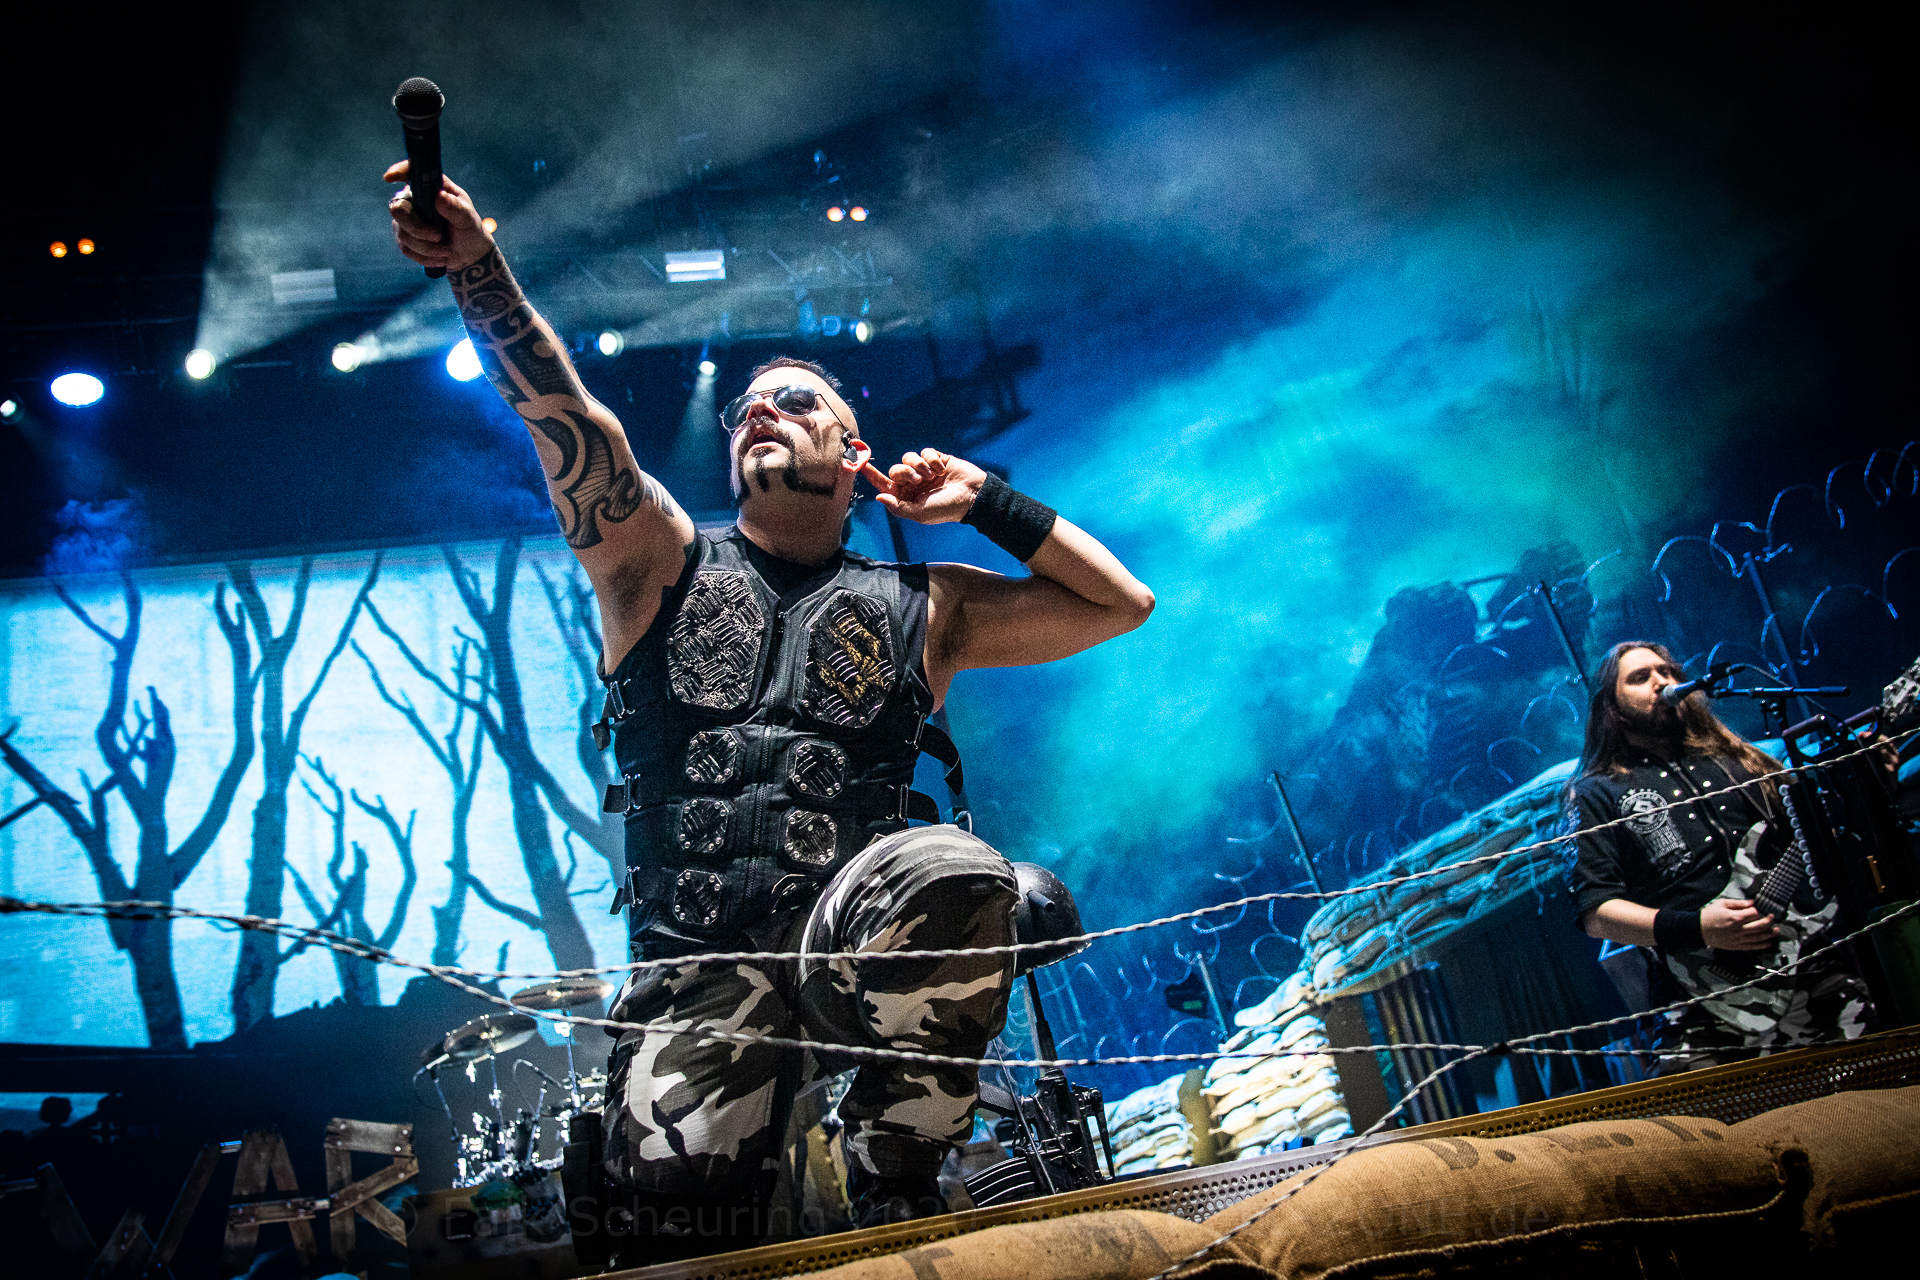 SABATON - The Great Tour 2020 live in Leipzig - Fotocredit Falk Scheuring